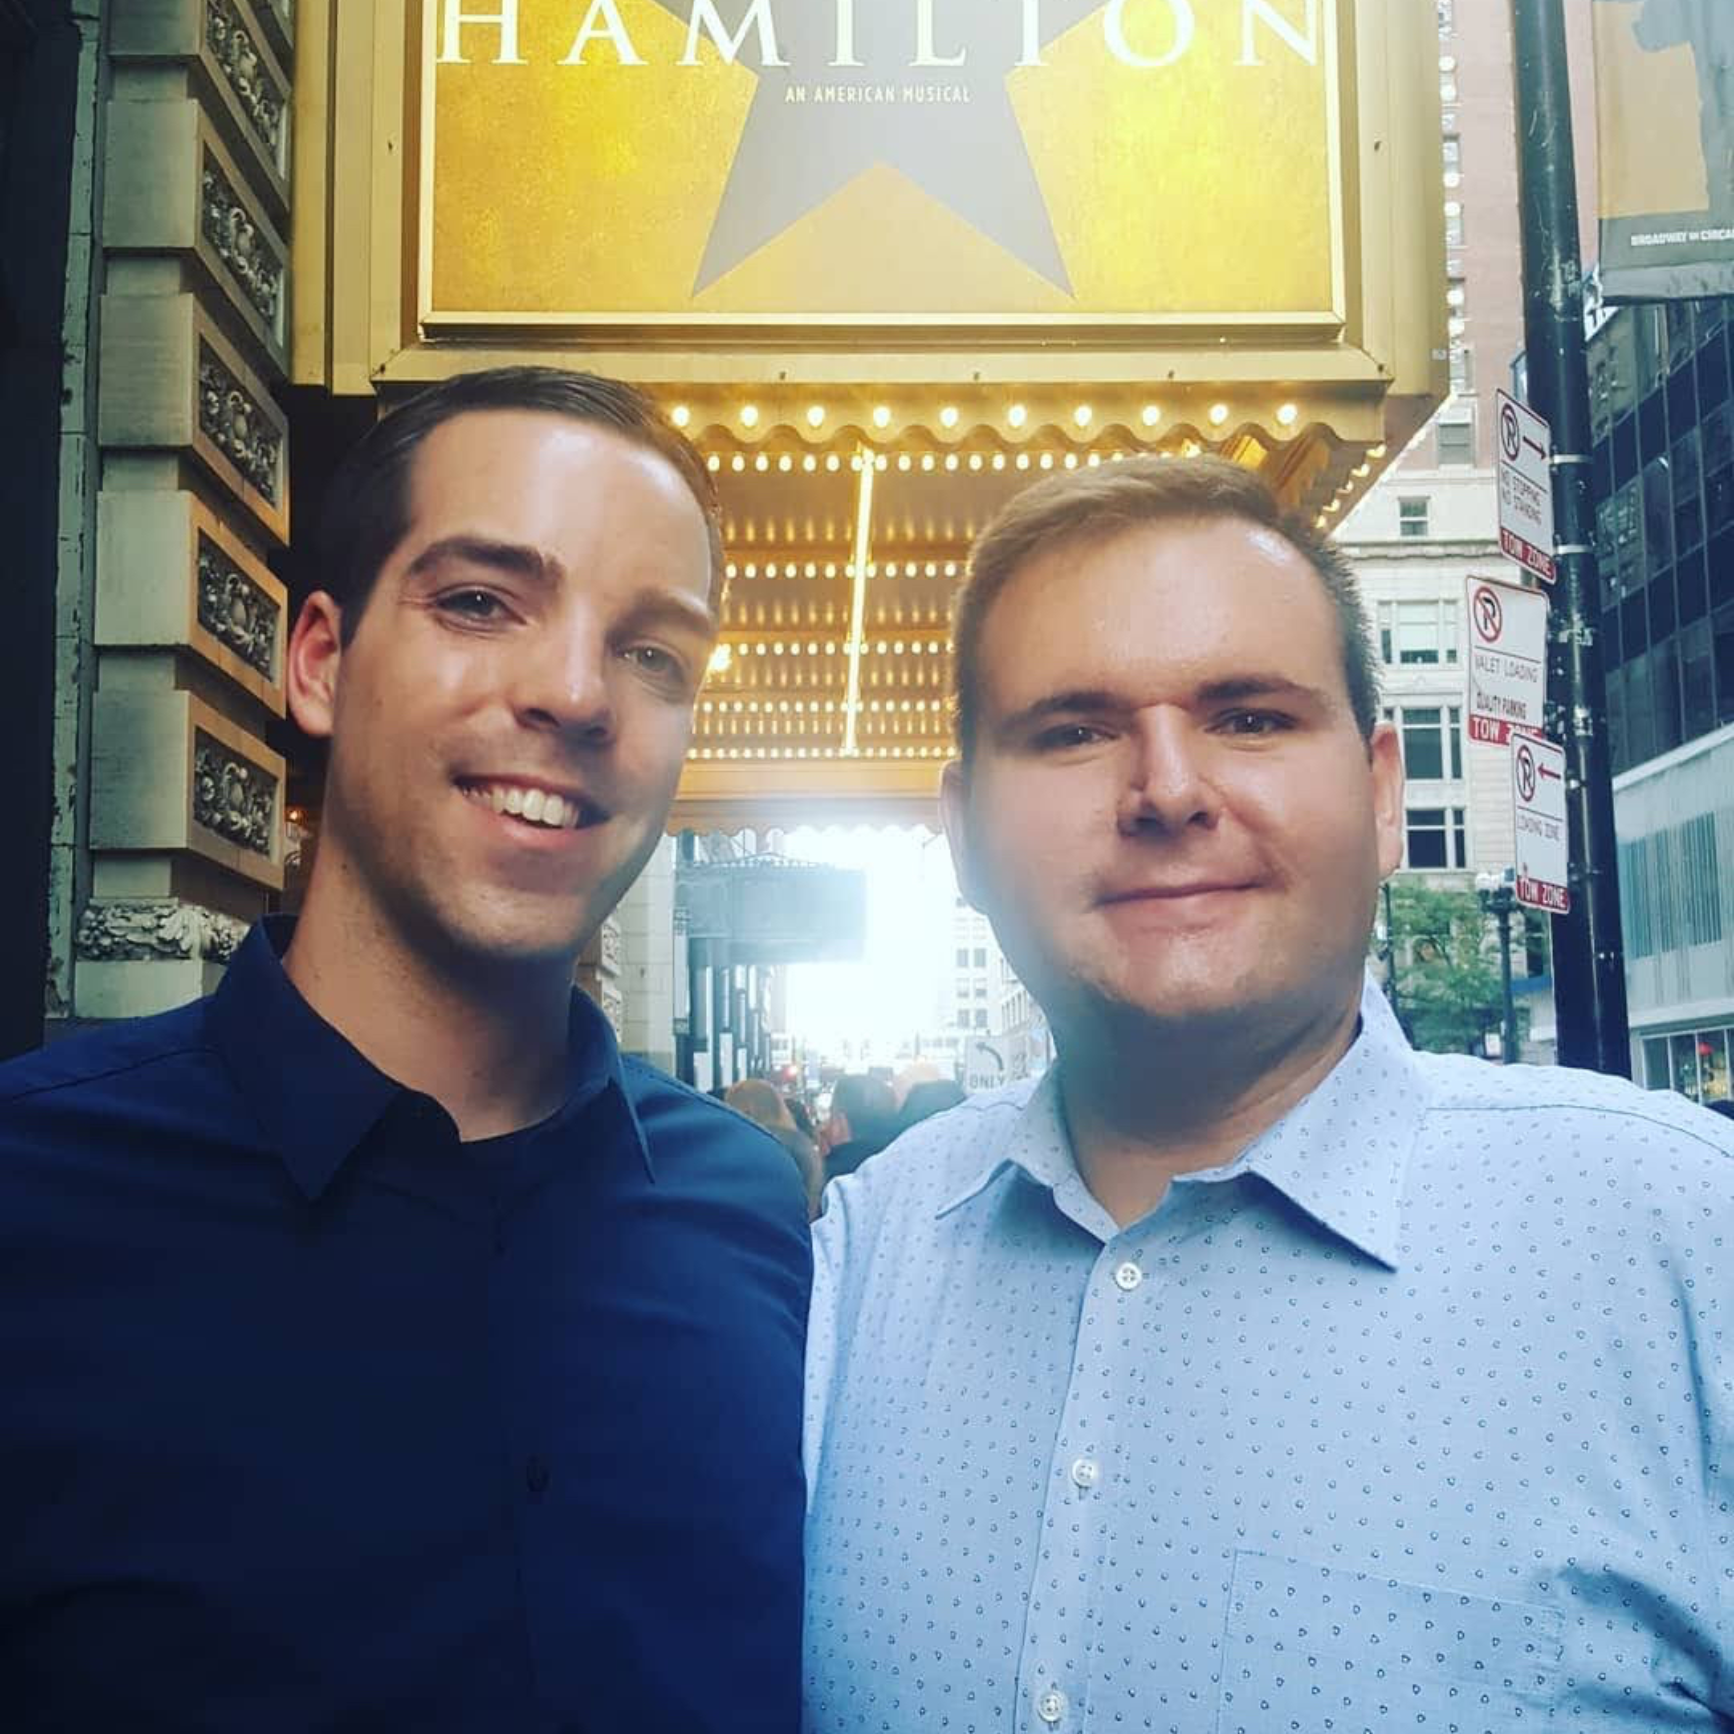 An early picture of us in Chicago about to see Hamilton